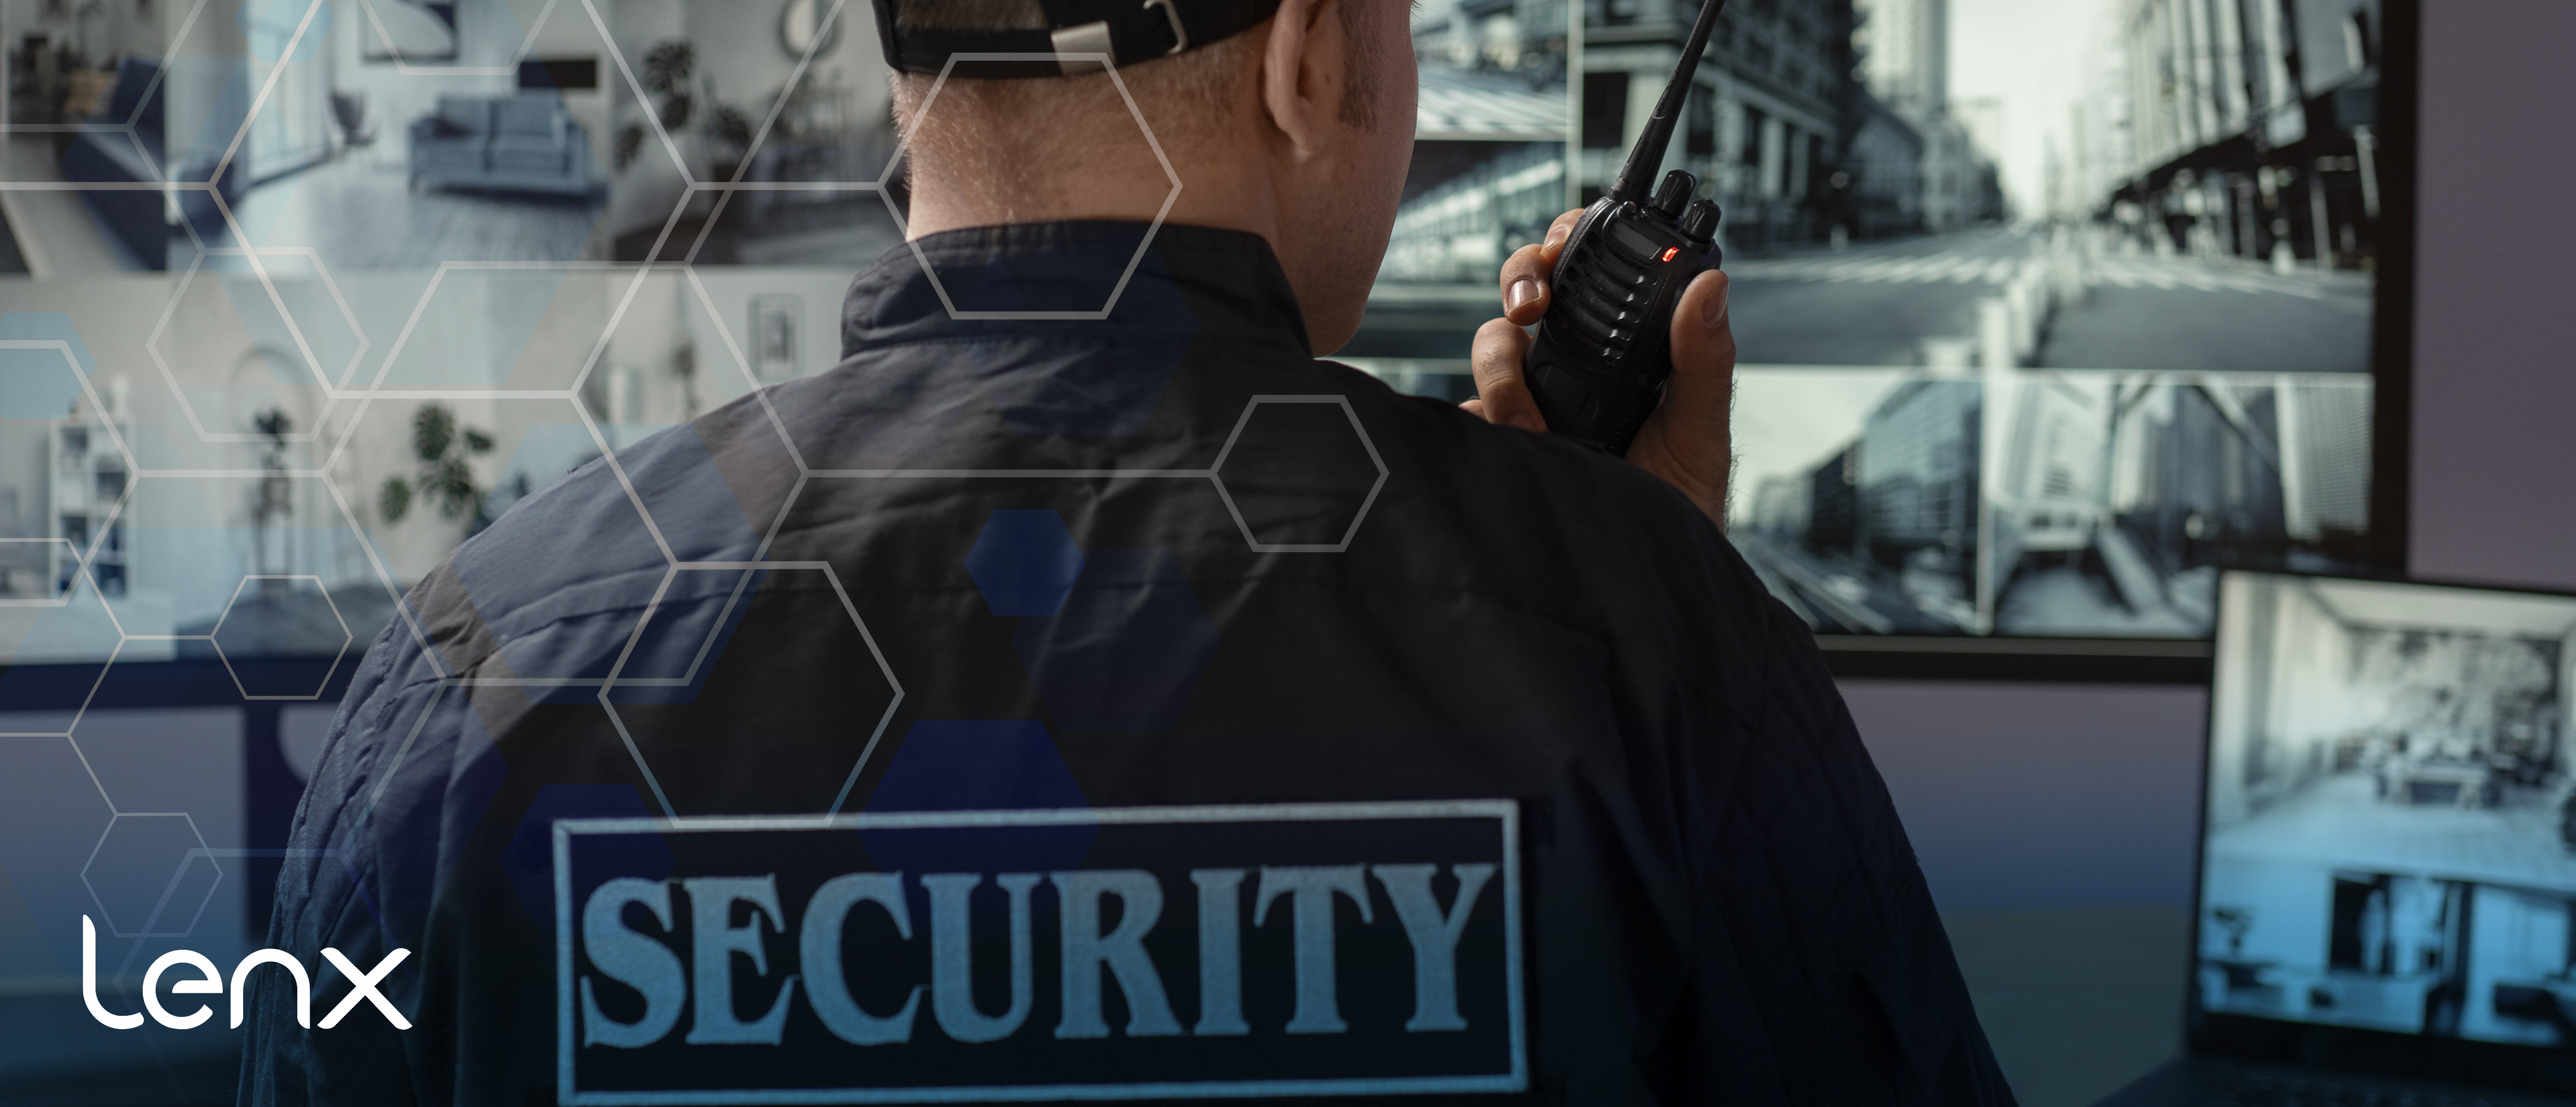 Getting The Most Out Of AI Security And Active Shooter Detection Systems